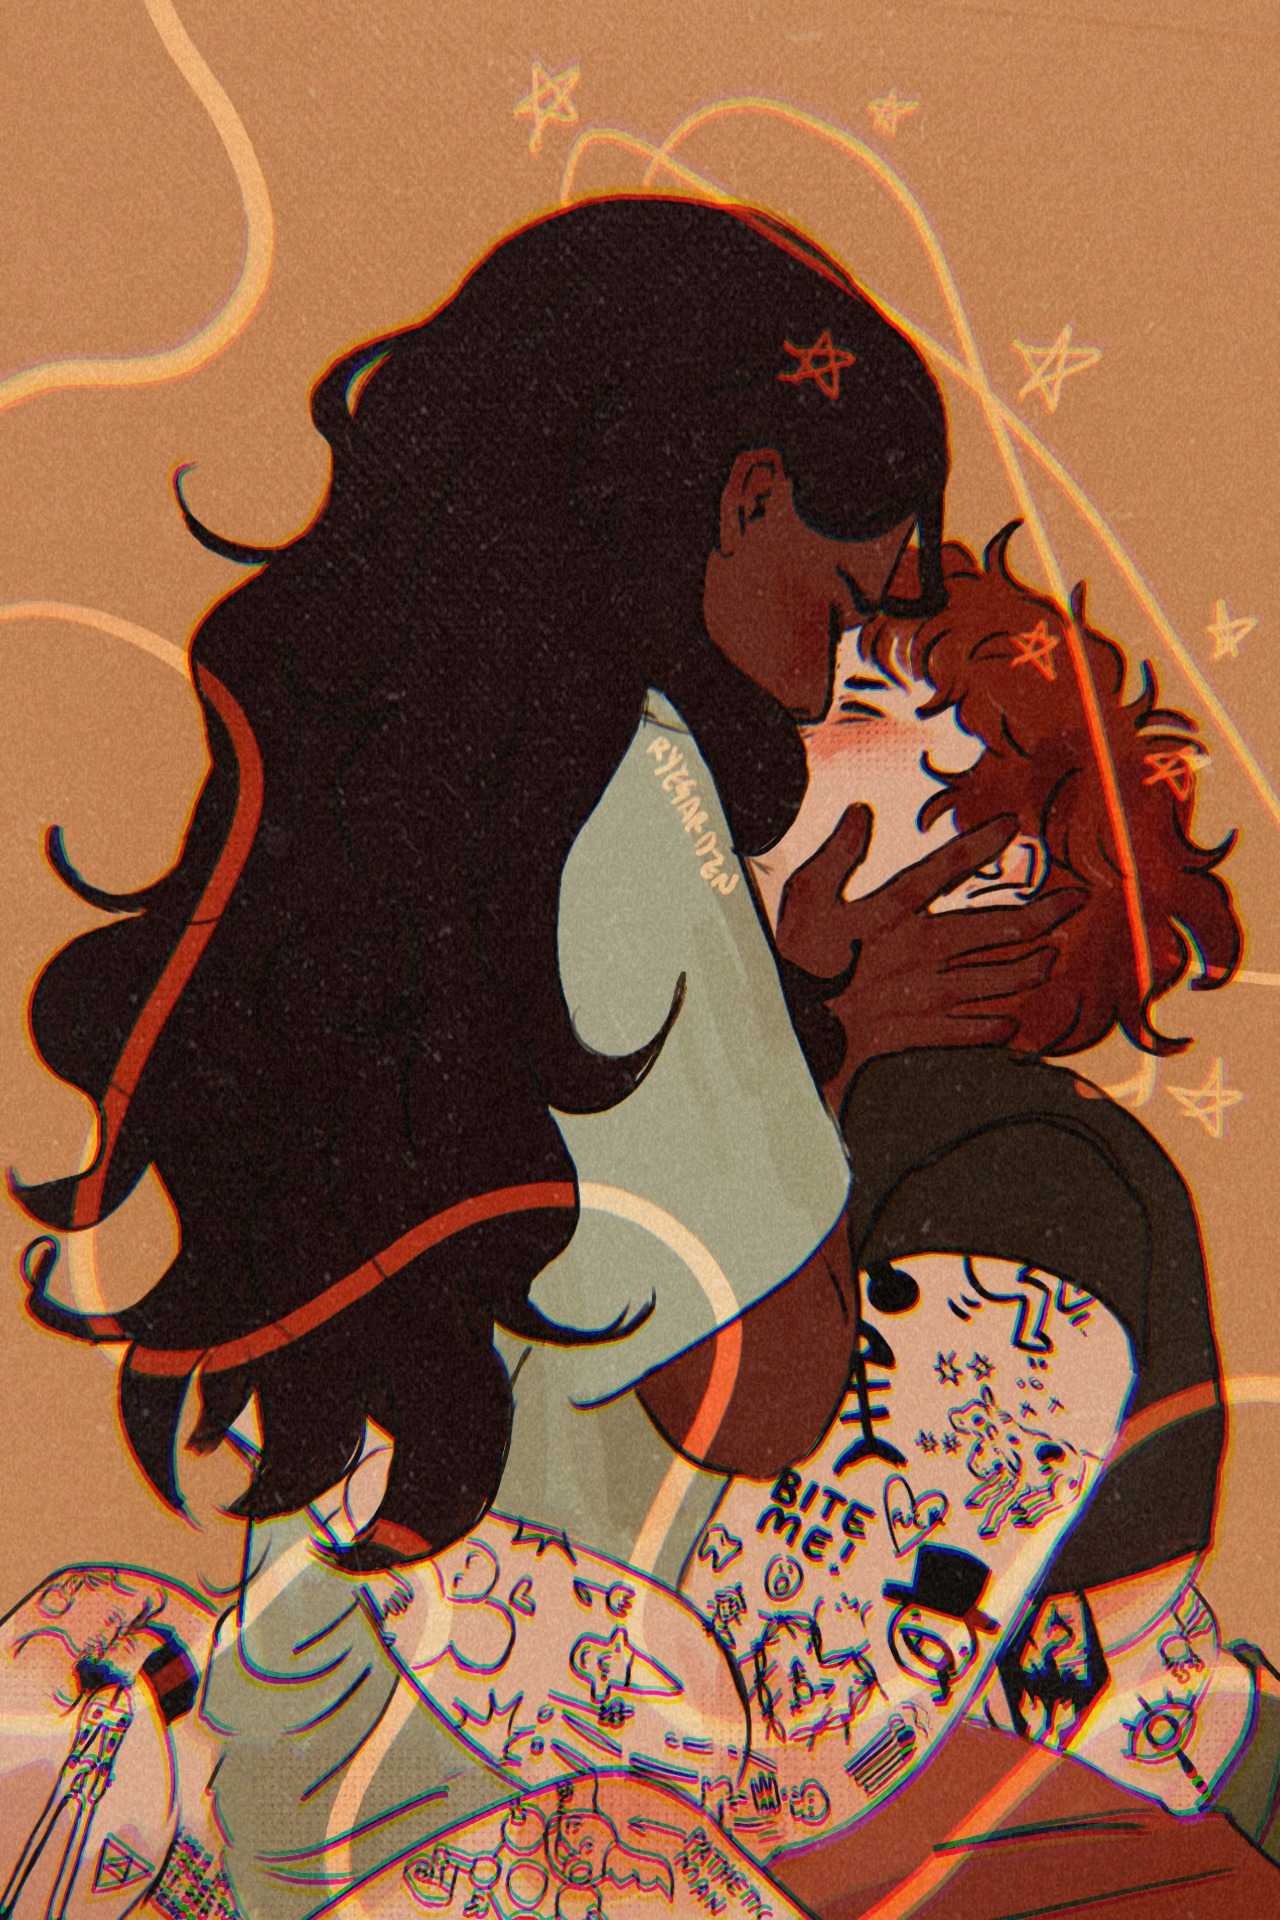 💫  starstruck!  💫
(it’s those OCs again.. and I got to draw more tattoos) #wlw#mlm#nblnb#t4t#t4t art #marm and olive